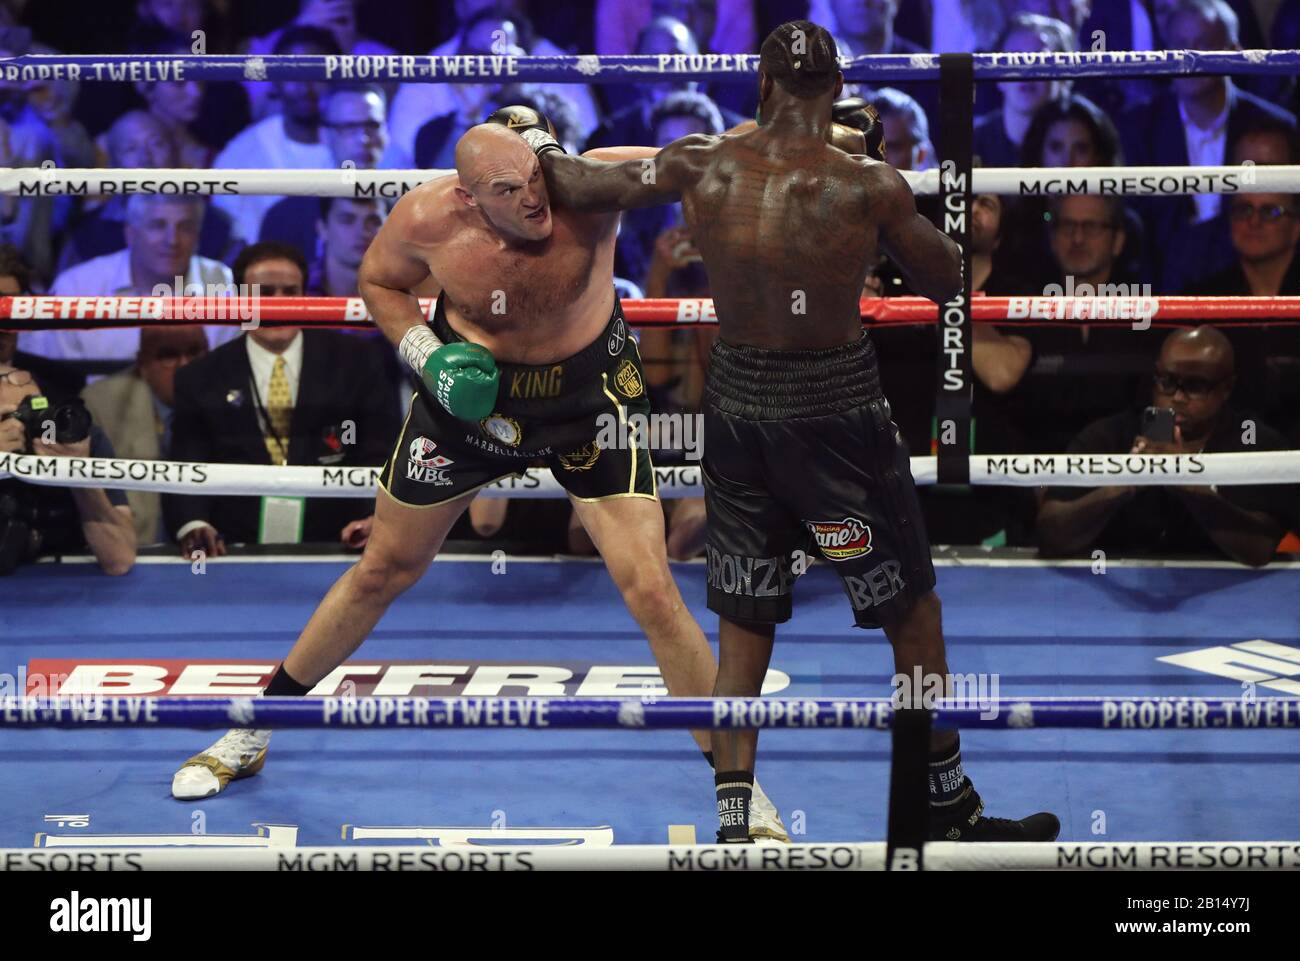 Tyson Fury (left) and Deontay Wilder during the World Boxing Council World Heavy Title bout at the MGM Grand, Las Vegas. Stock Photo